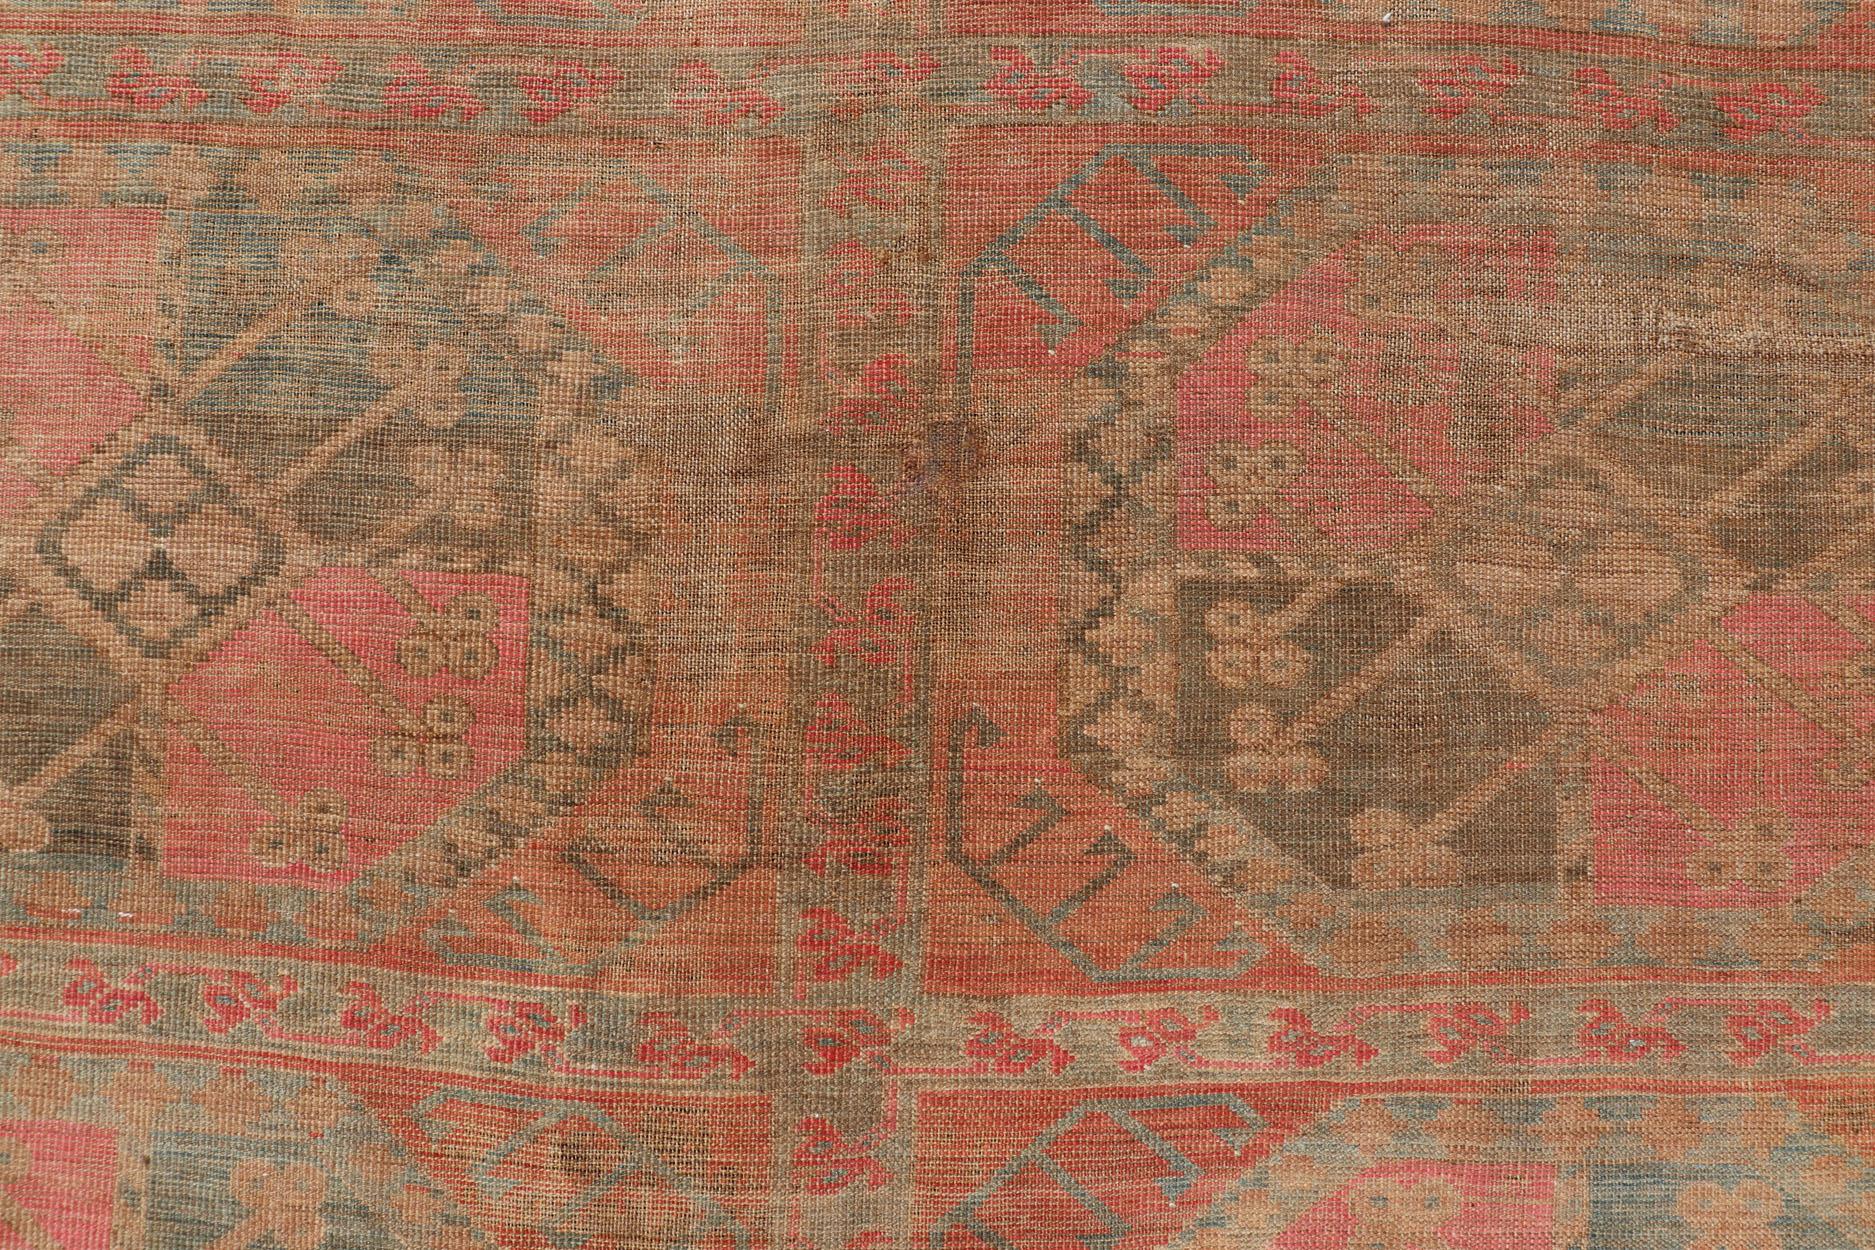 Turkestan Large Turkomen Ersari Rug with All-Over Gul Design in Tan, Coral, and Brown For Sale